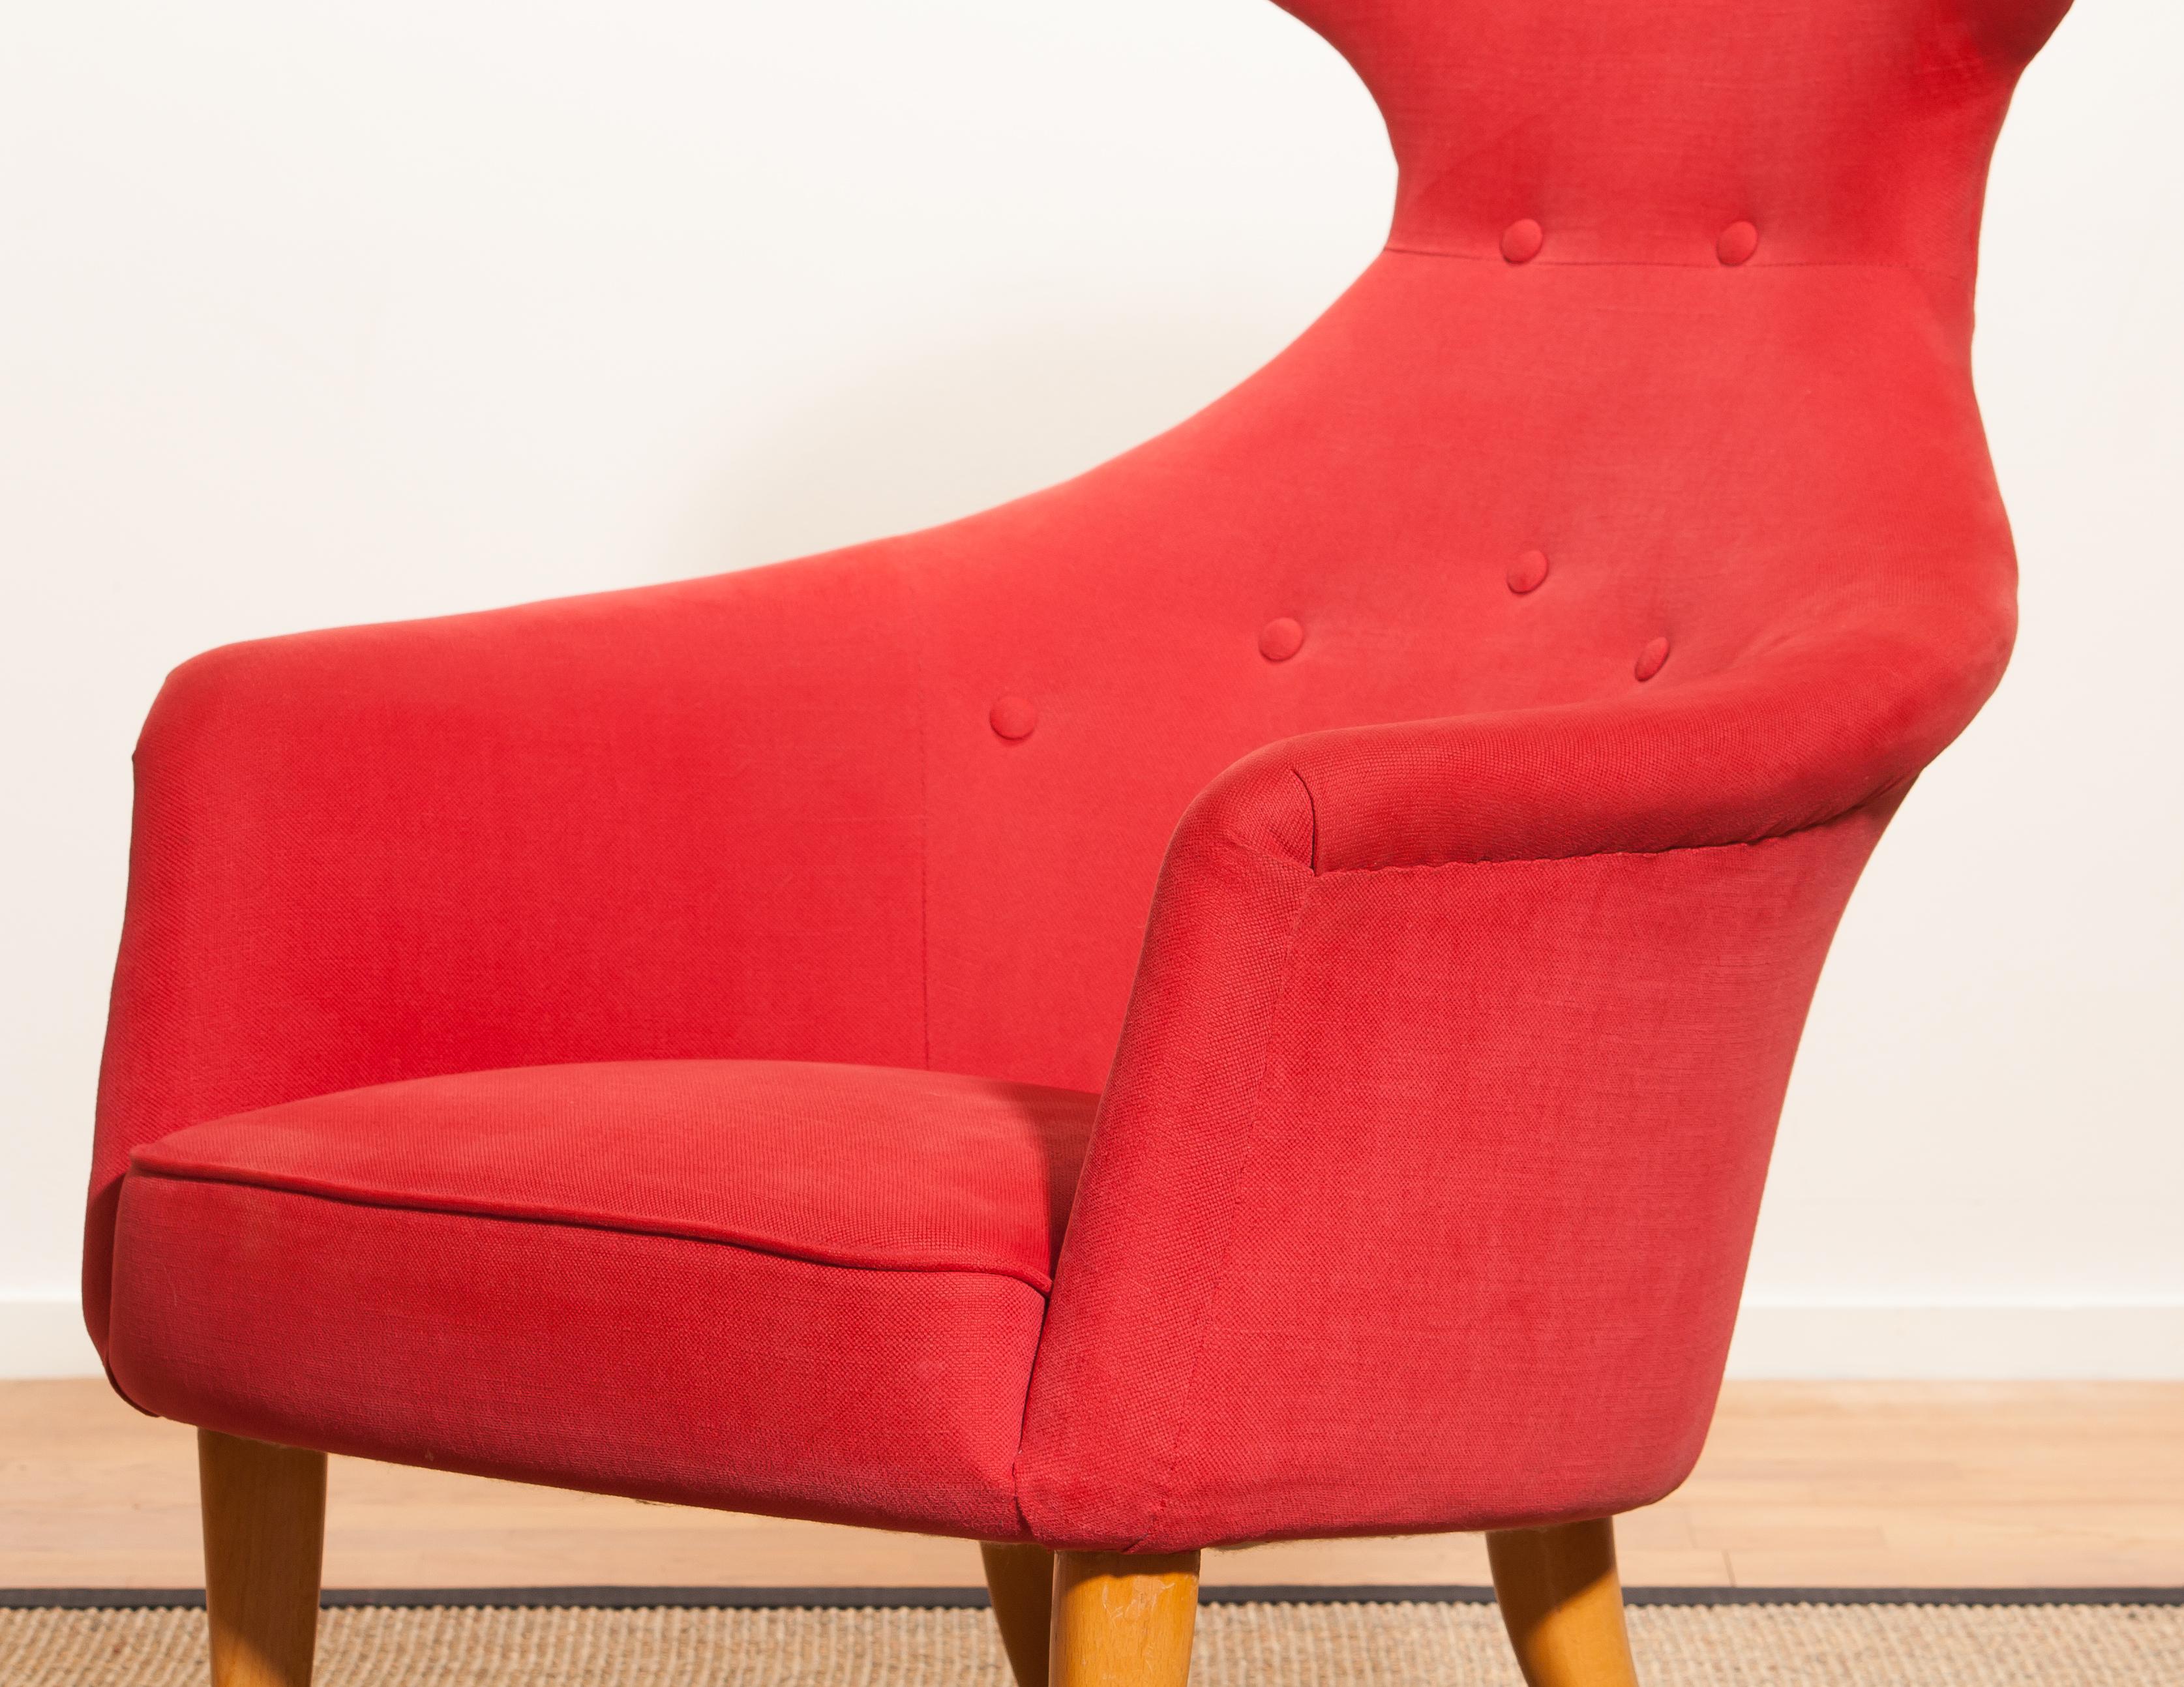 Beautiful armchair designed by Kerstin Hörlin-Holmquist.
The chair is produced by Nordiska Kompaniet.
This version is the 'Stora Eve' and is from a wooden frame with (newly upholstered) red wool upholstering.
Period 1950-1959.
Dimensions: H 97